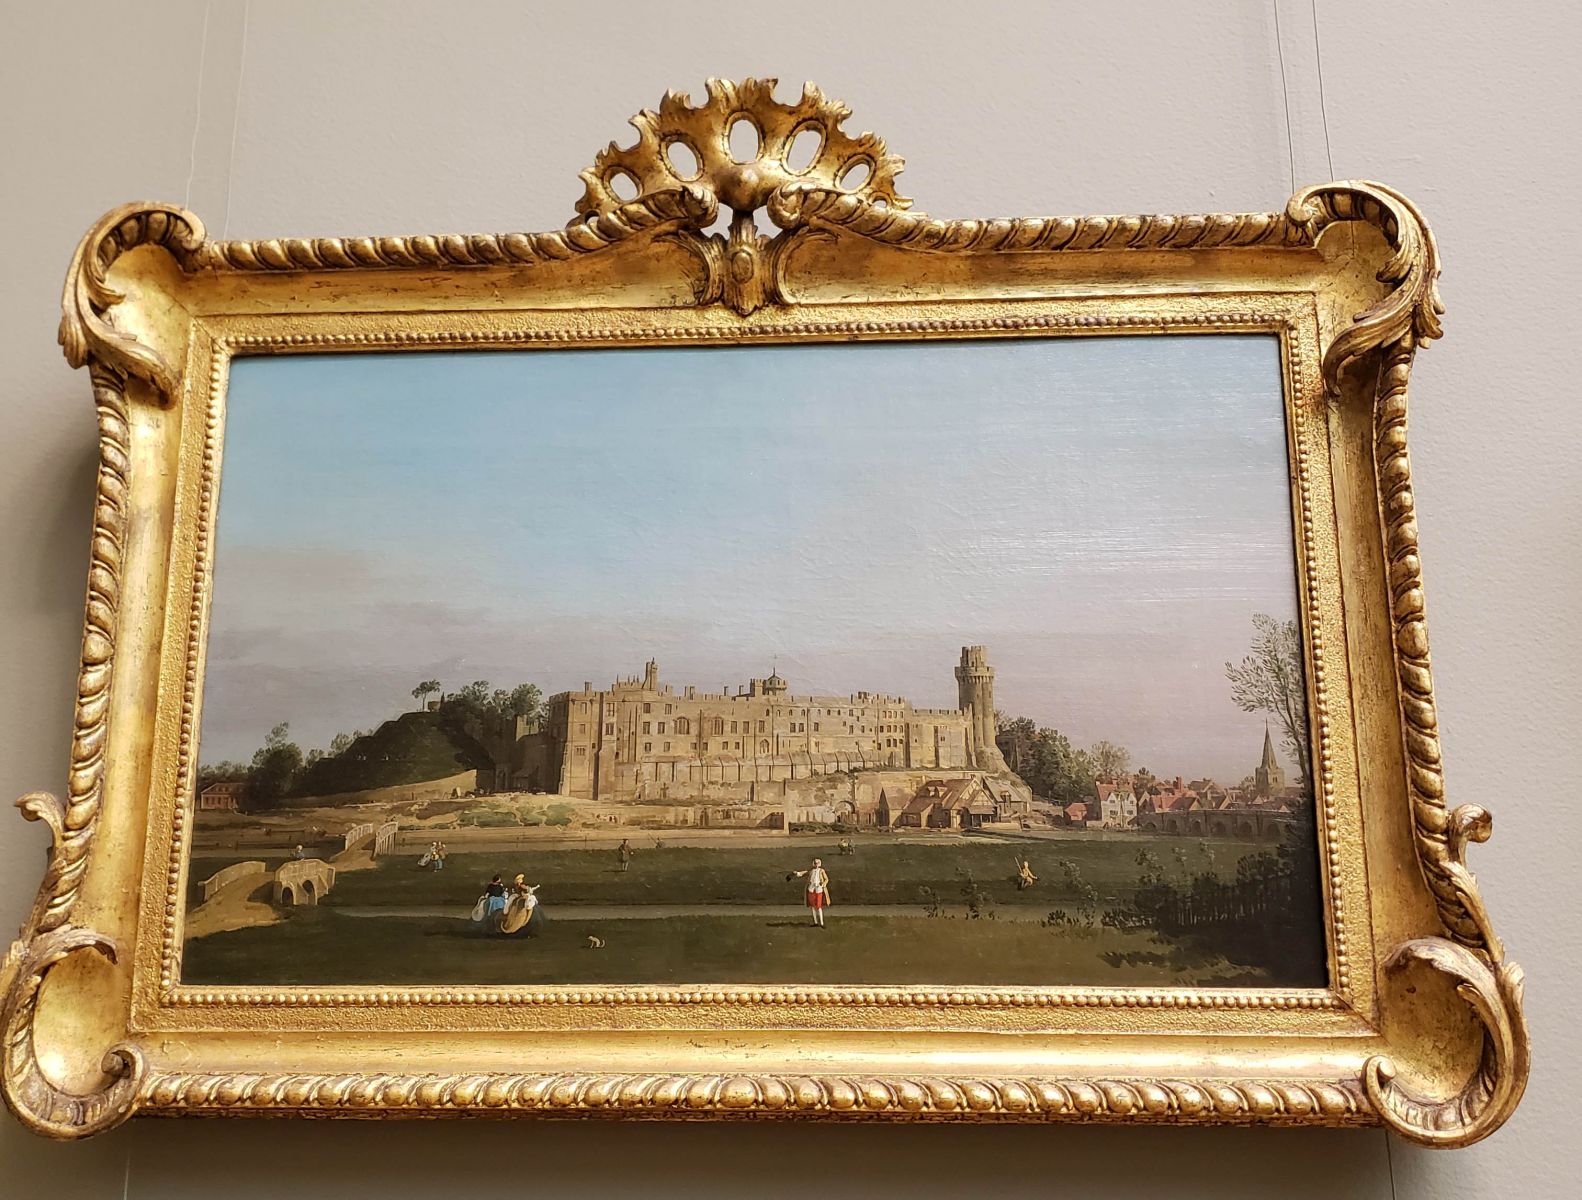 Warwick Castle by Canaletto